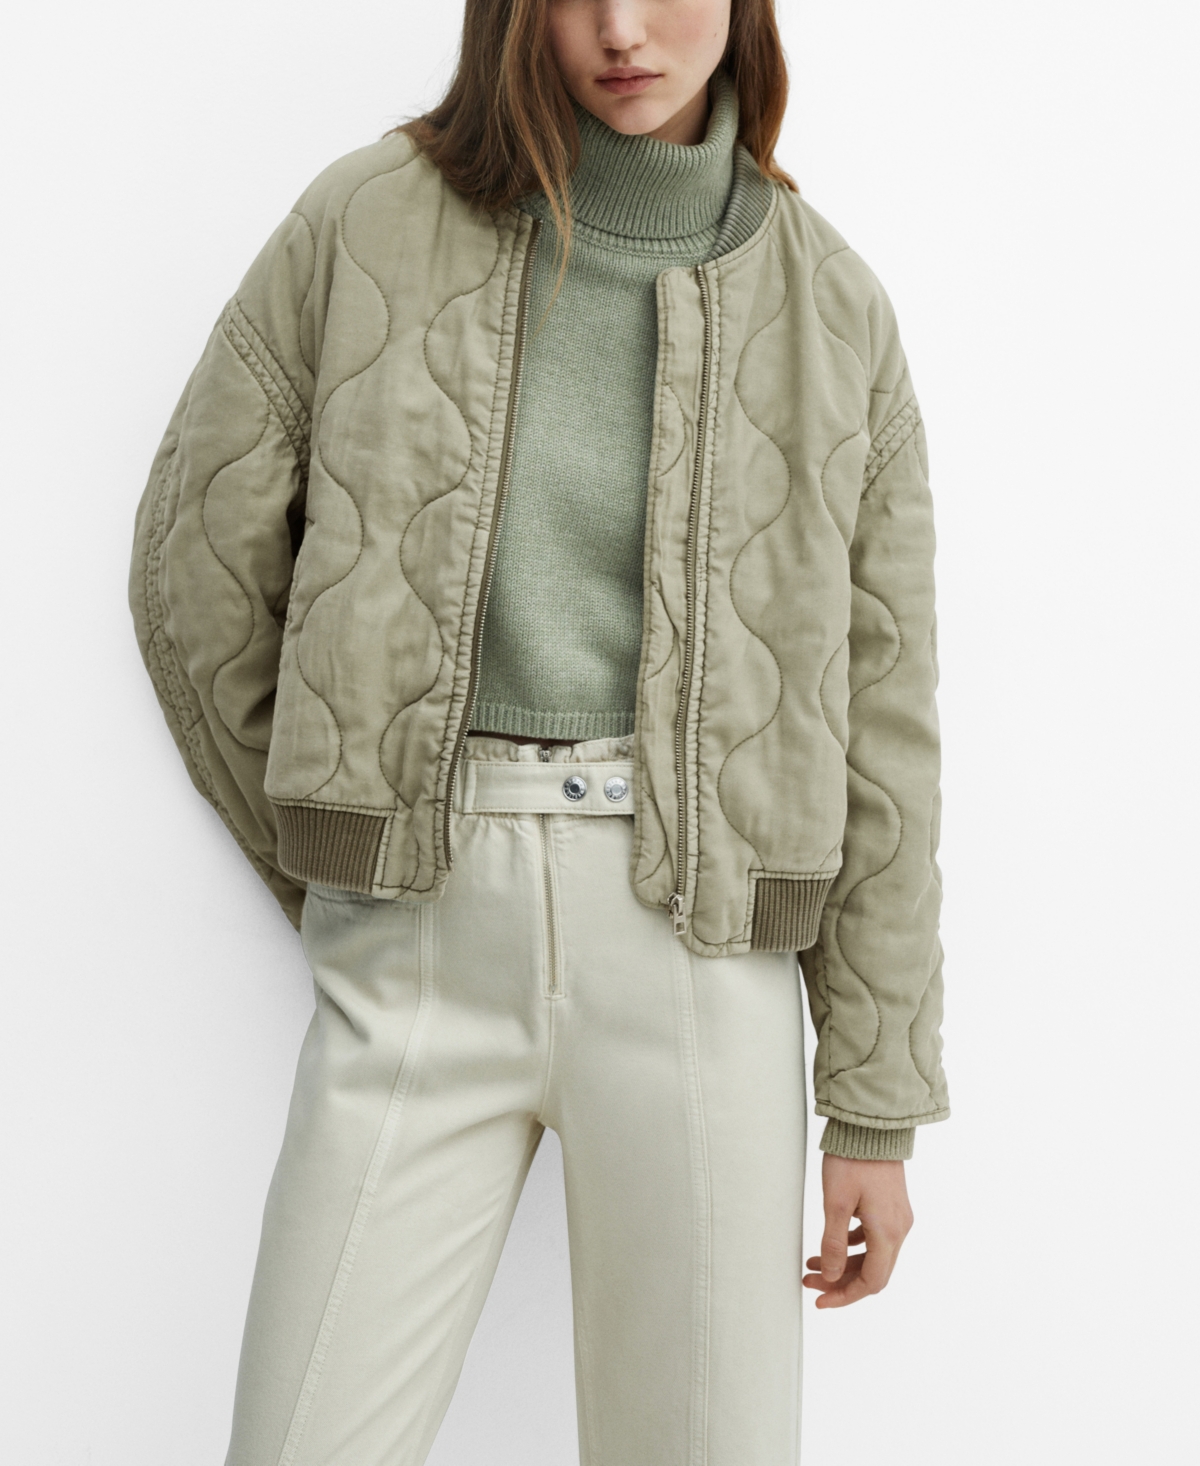 Women's Quilted Bomber Jacket - Beige-Kh